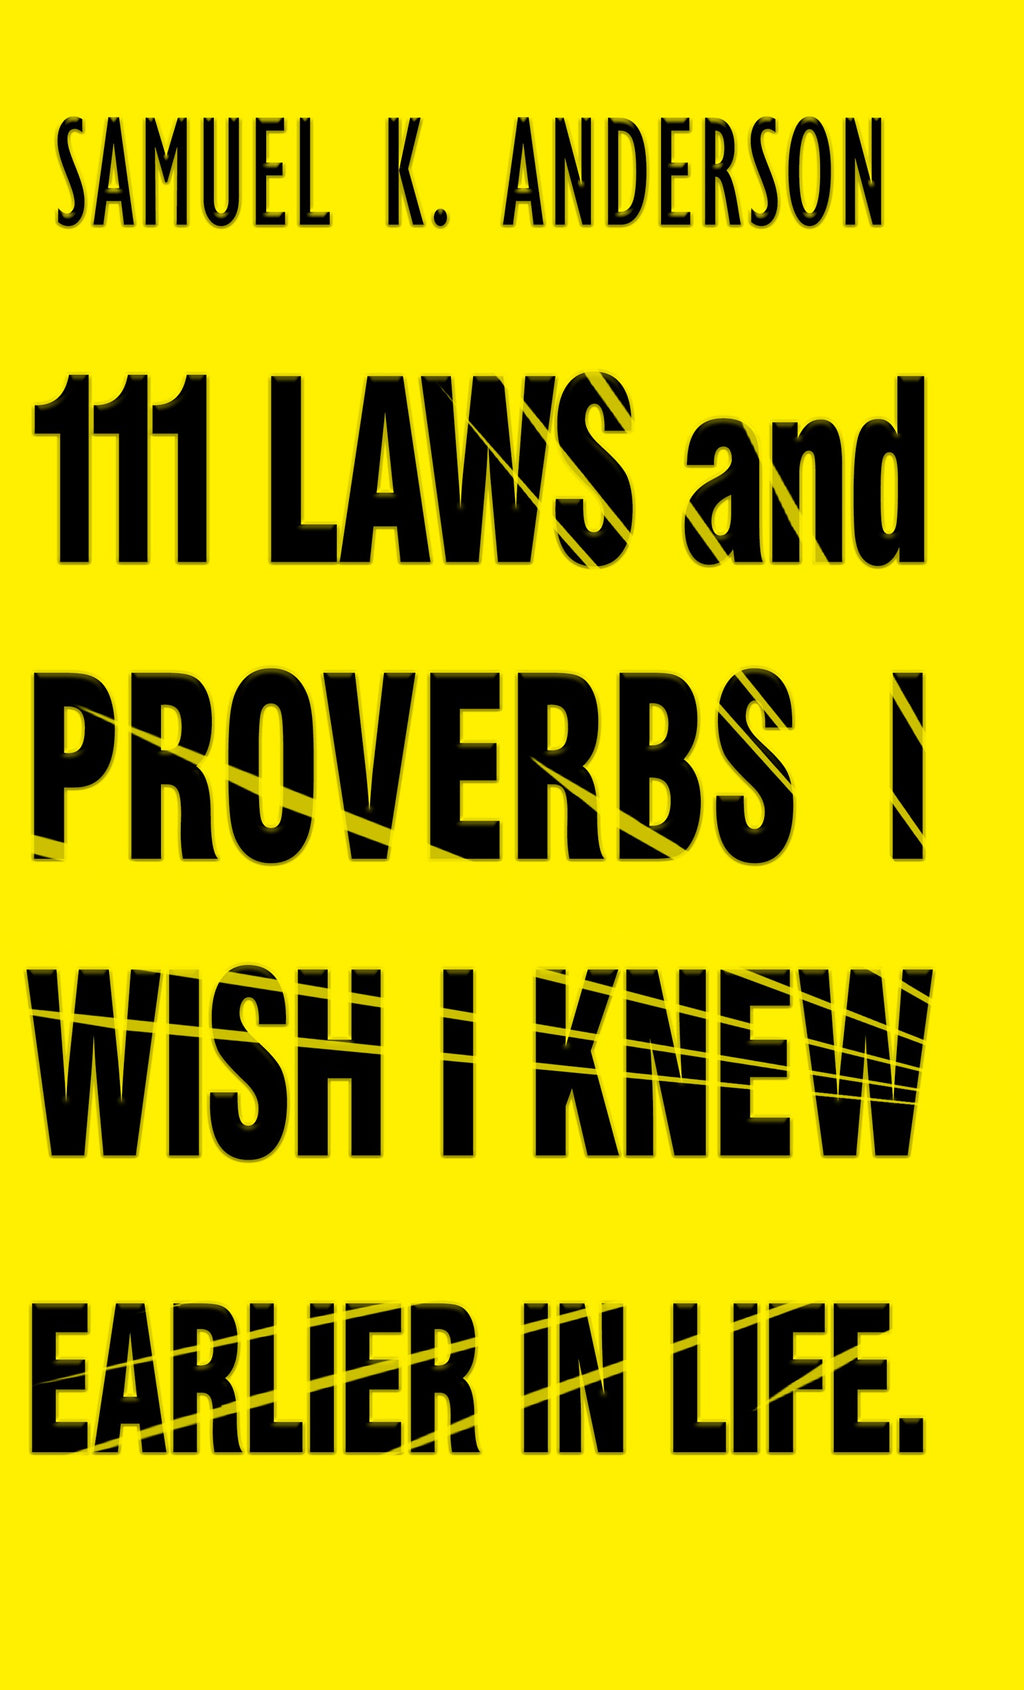 111 LAWS and PROVERBS I WISH I KNEW EARLIER IN LIFE